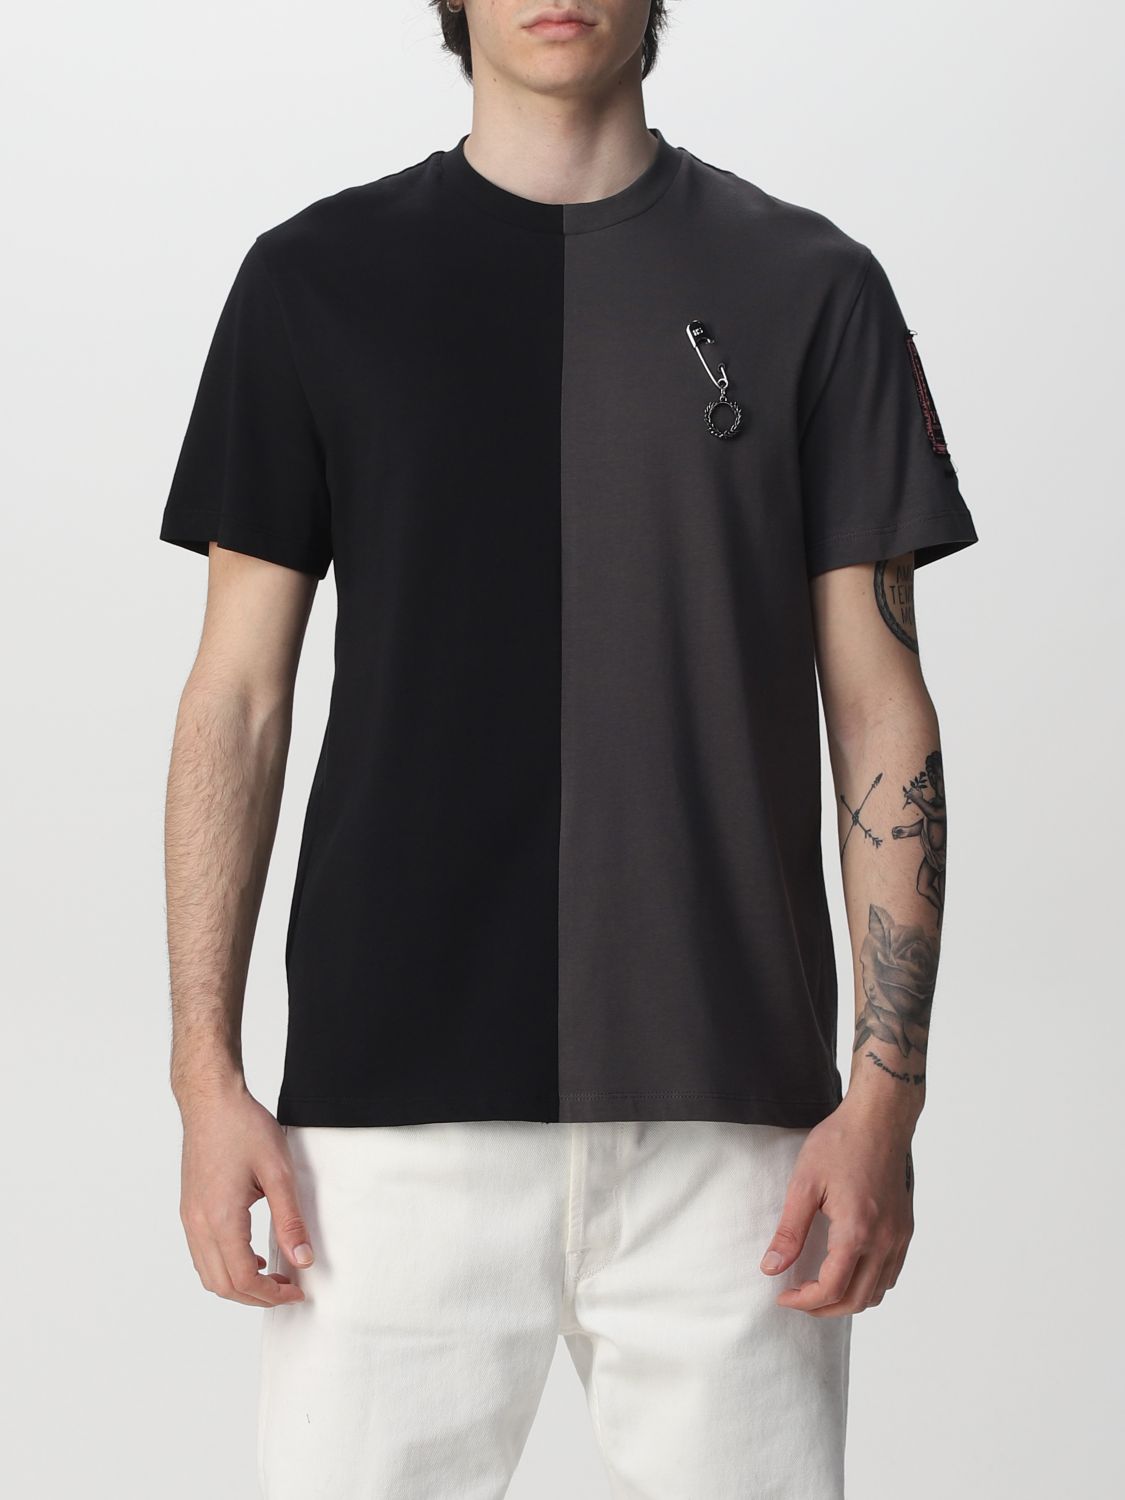 Tシャツ Fred Perry By Raf Simons: Tシャツ Fred Perry By Raf Simons メンズ グレー 1